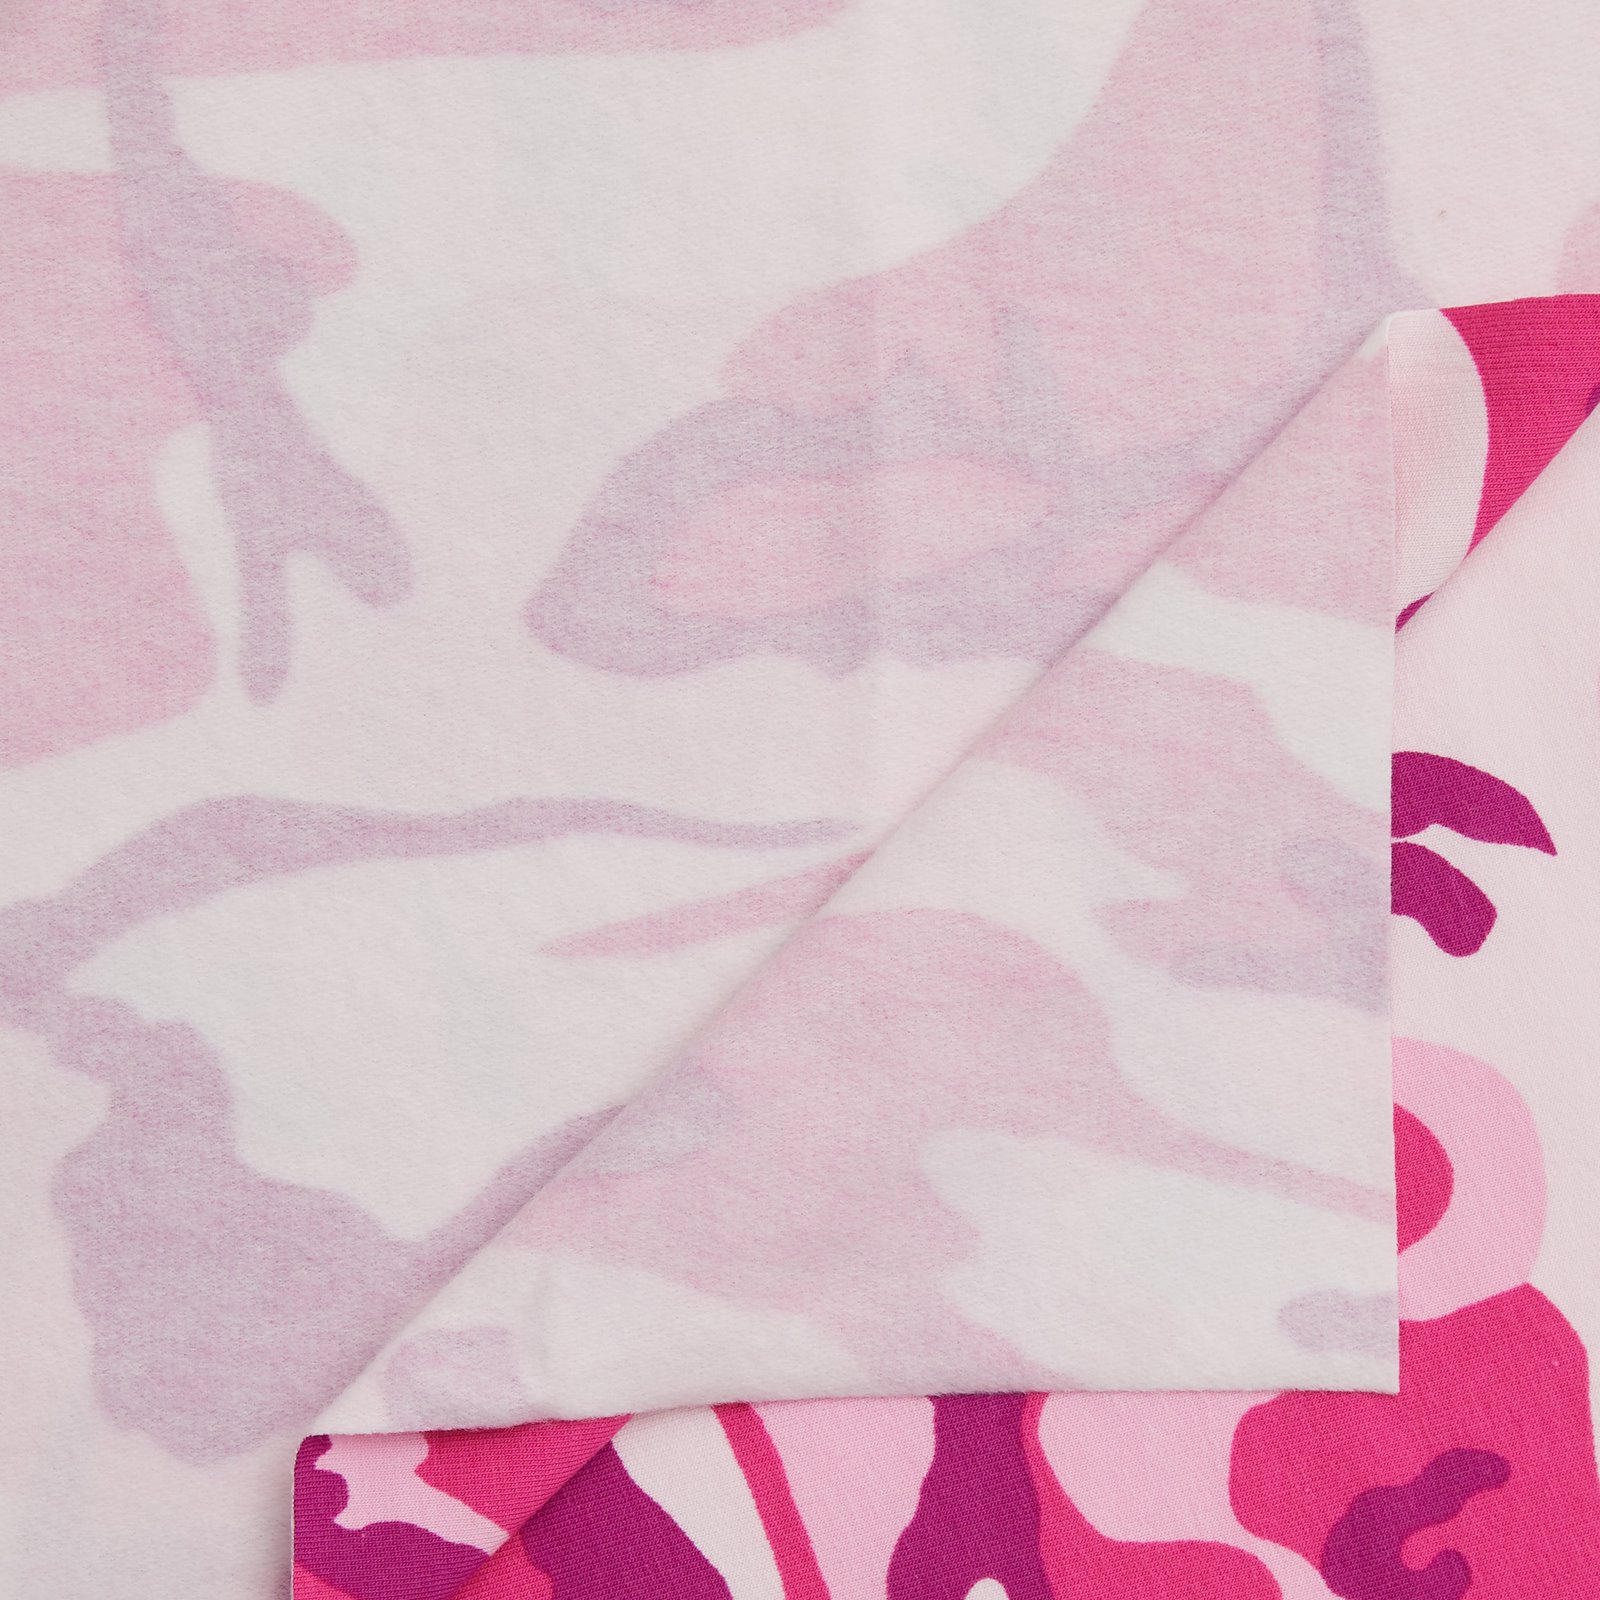 Sweat baby pink m camouflage print ang. 211935_pack_b